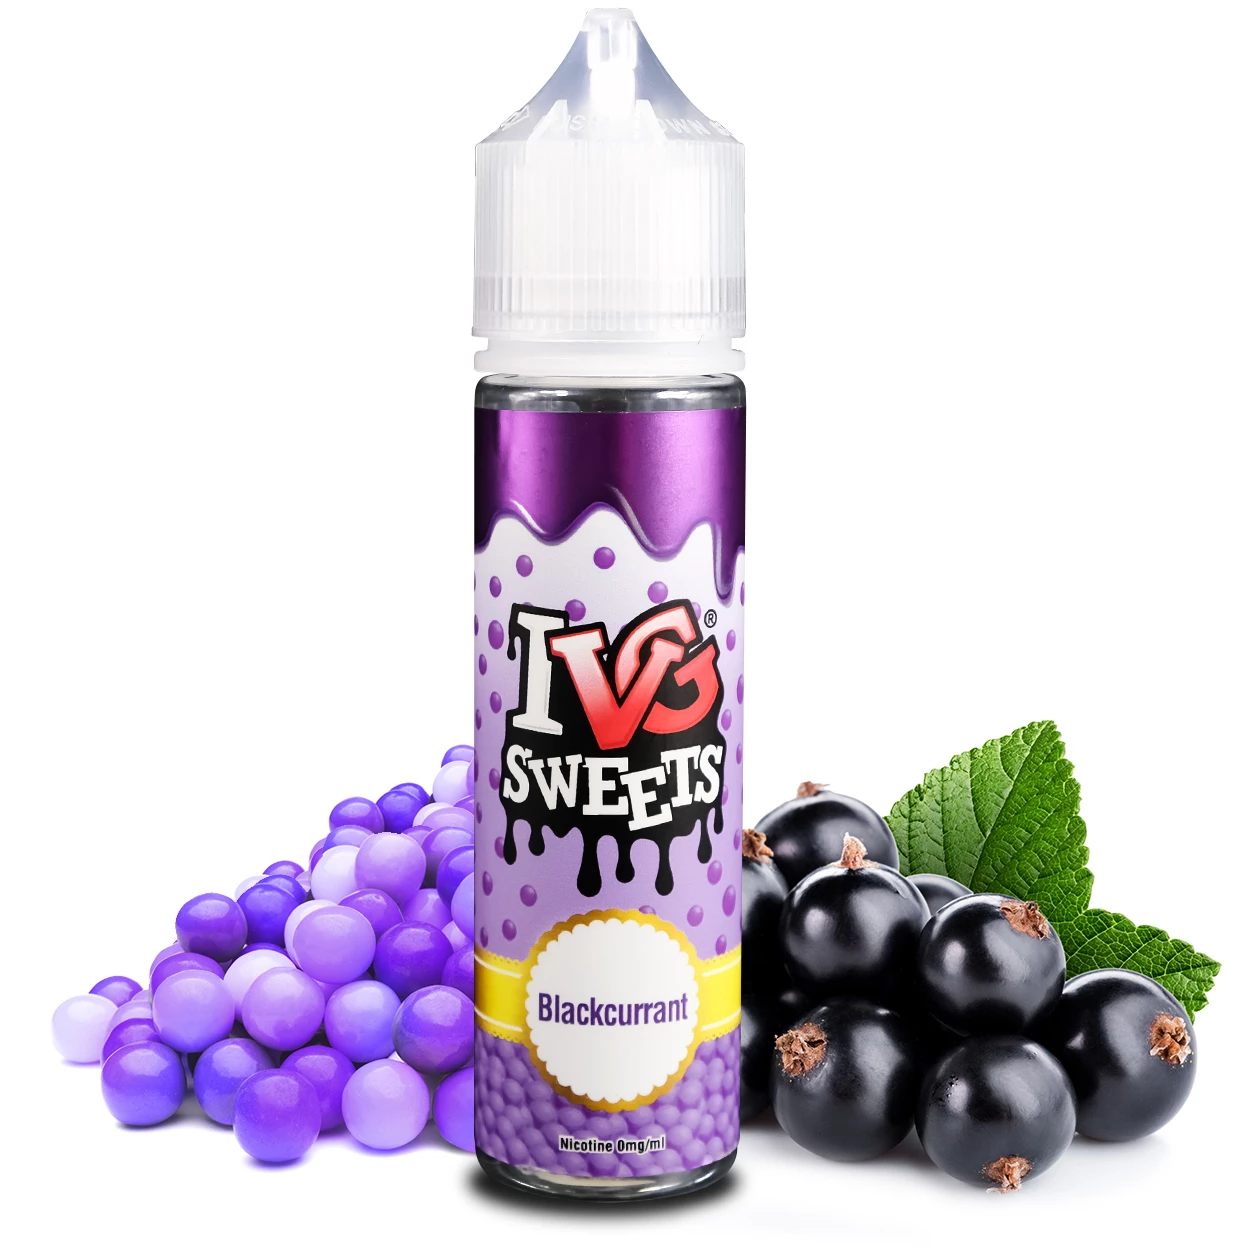 Blackcurrant-IVGSweets